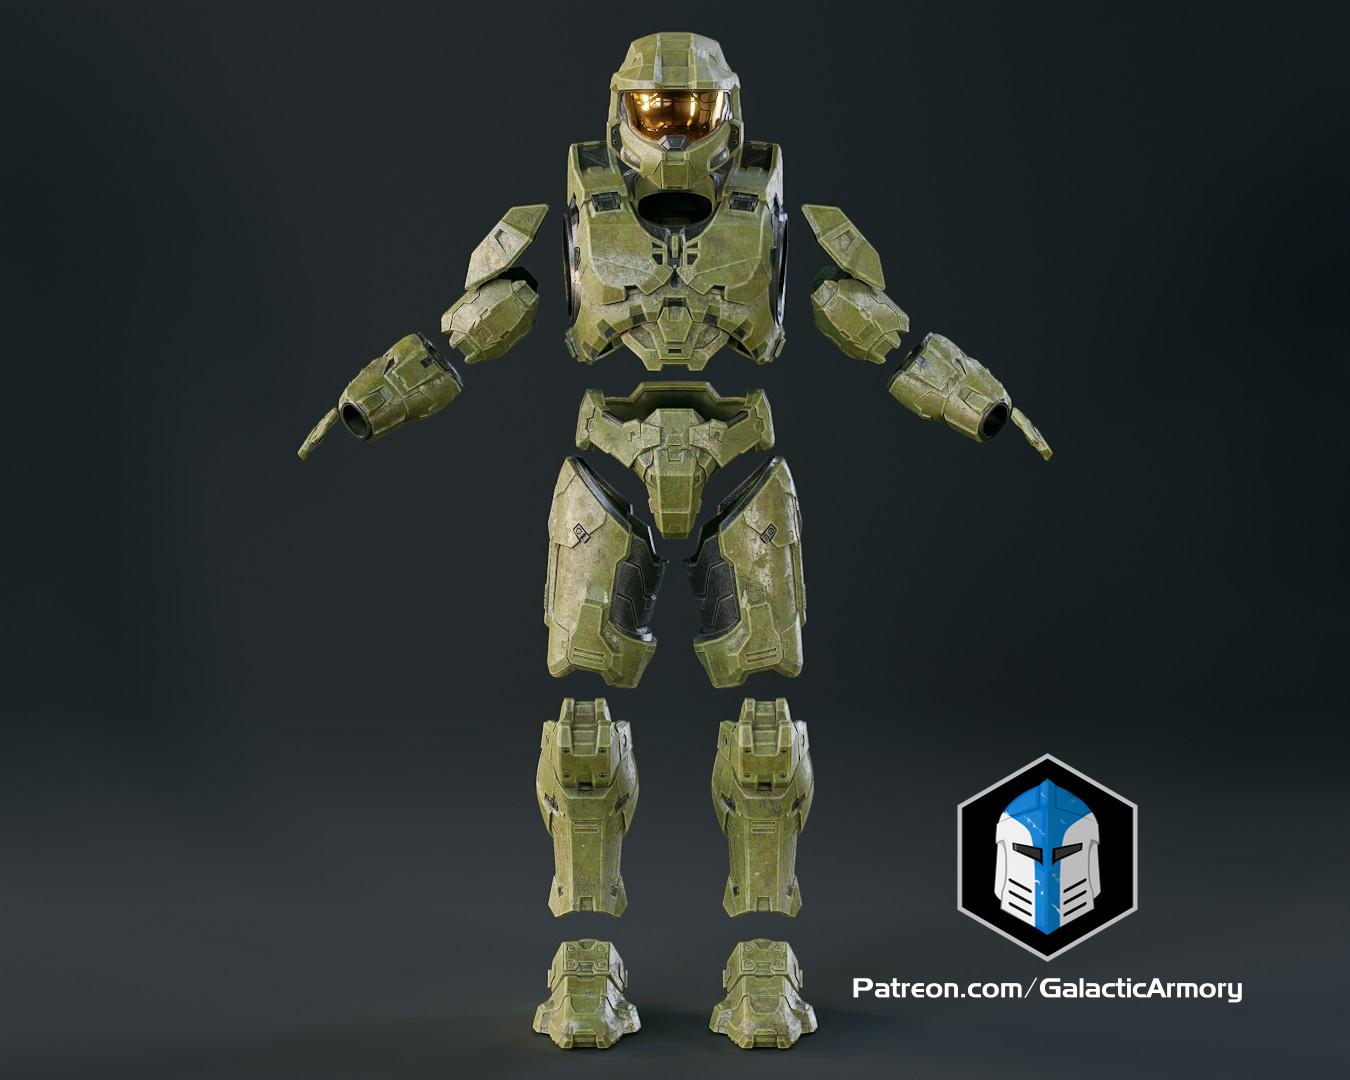 [Remastered Files!] The Halo Infinite Master Chief helmet and armor has been added to the Specialist rewards!